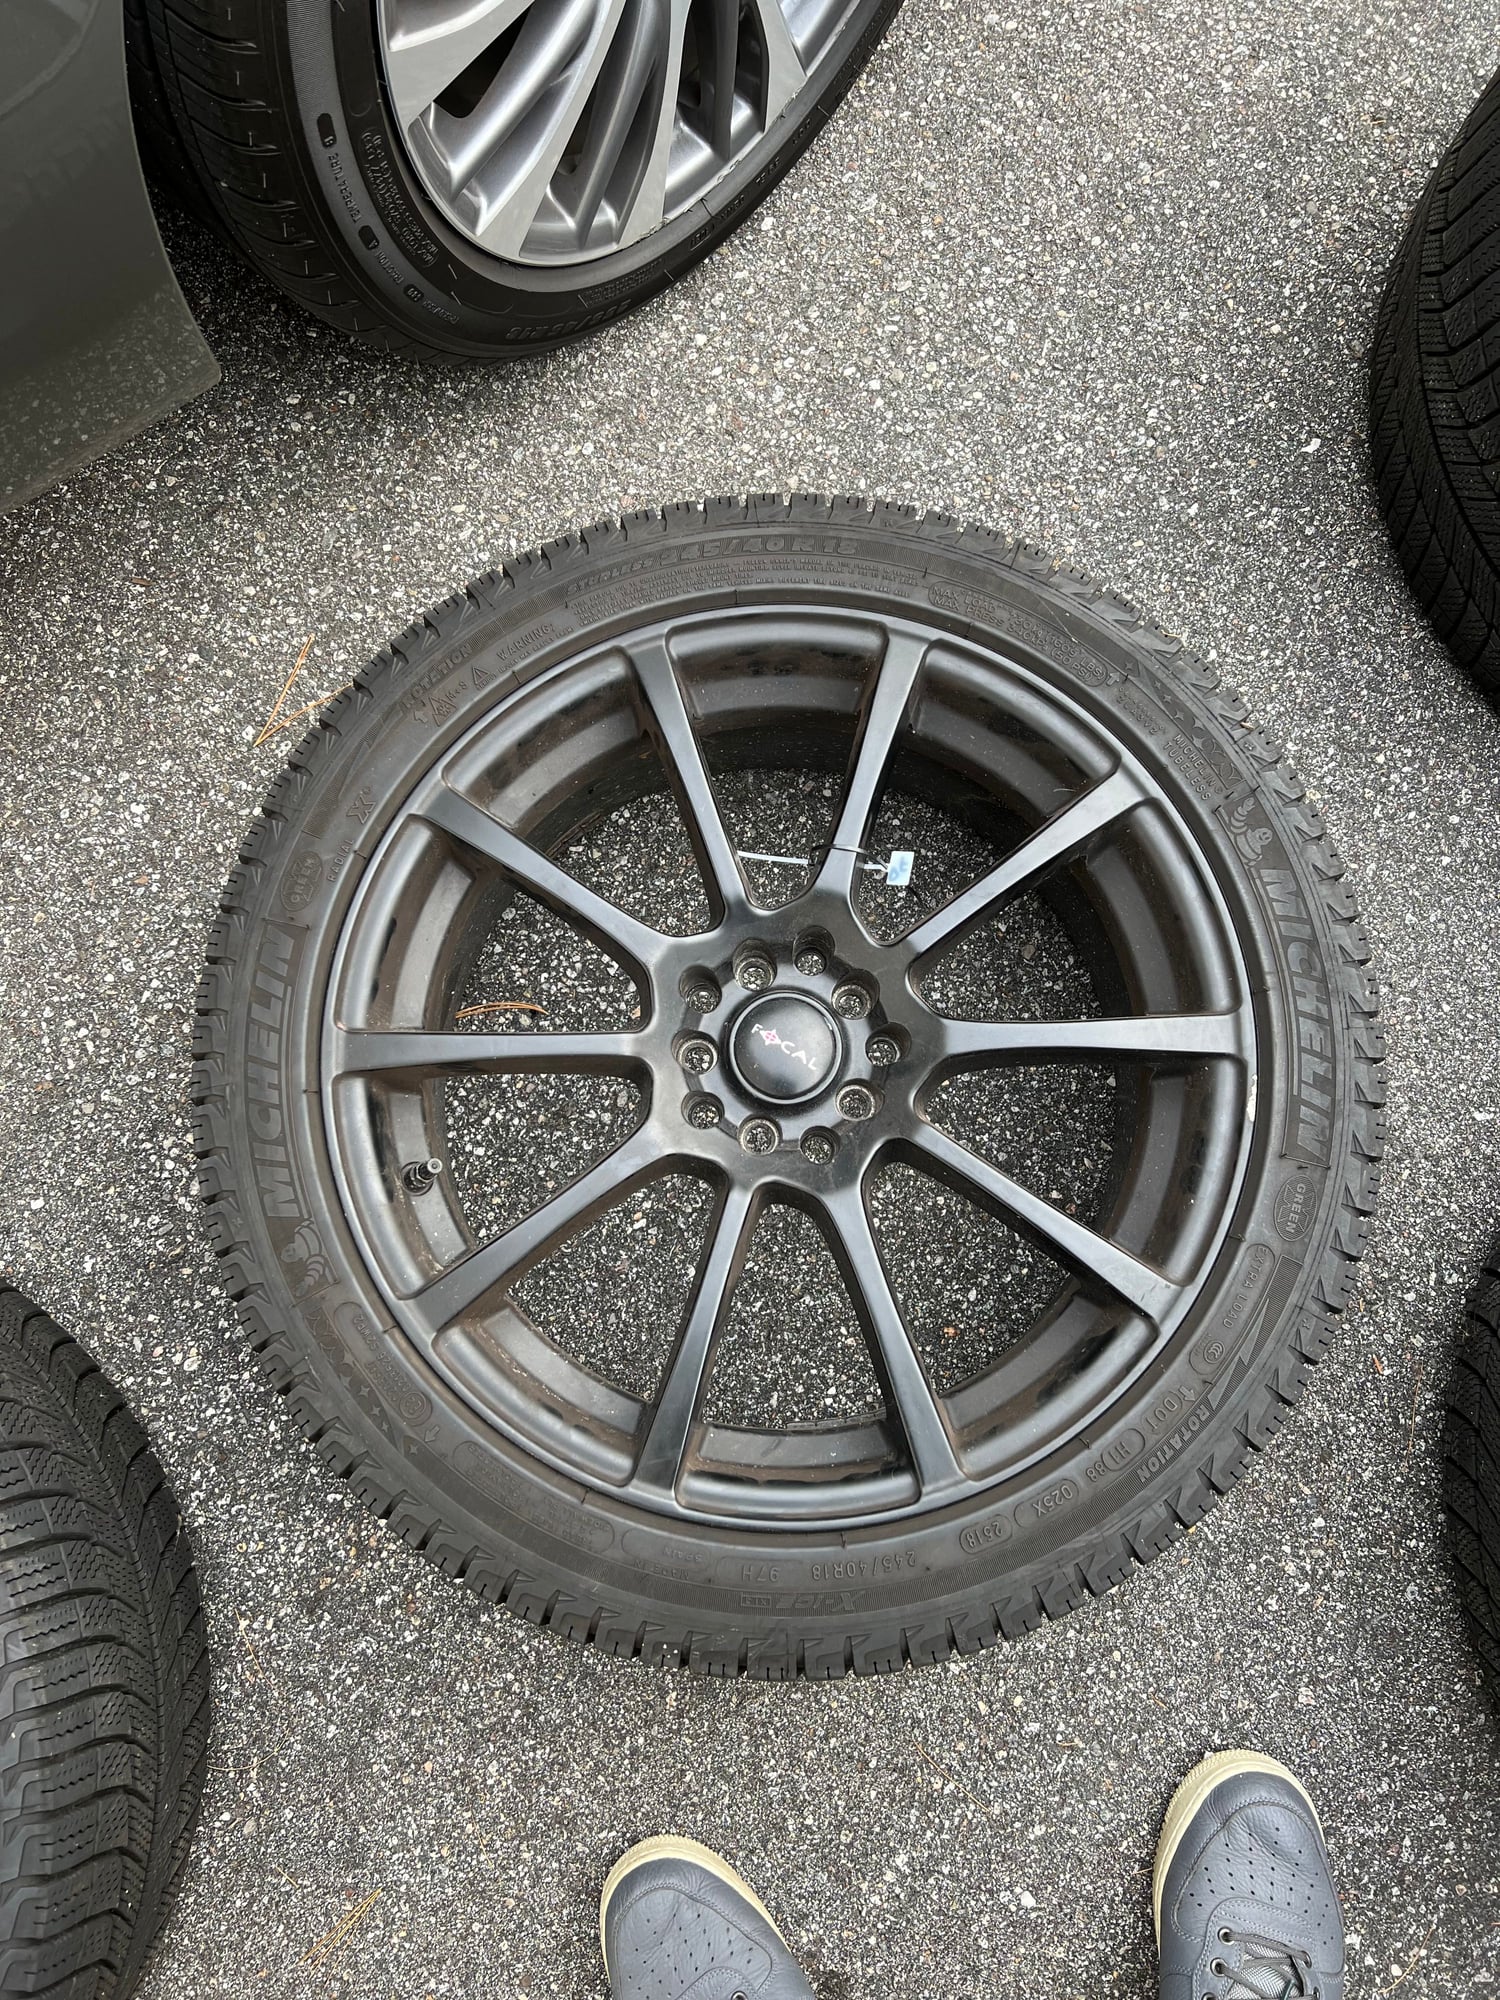 Wheels and Tires/Axles - Winter tire set. Michelin X-Ice Snow tires 245/40/R18 and Focal 18 inch rim. - Used - 0  All Models - Hartford, CT 06103, United States